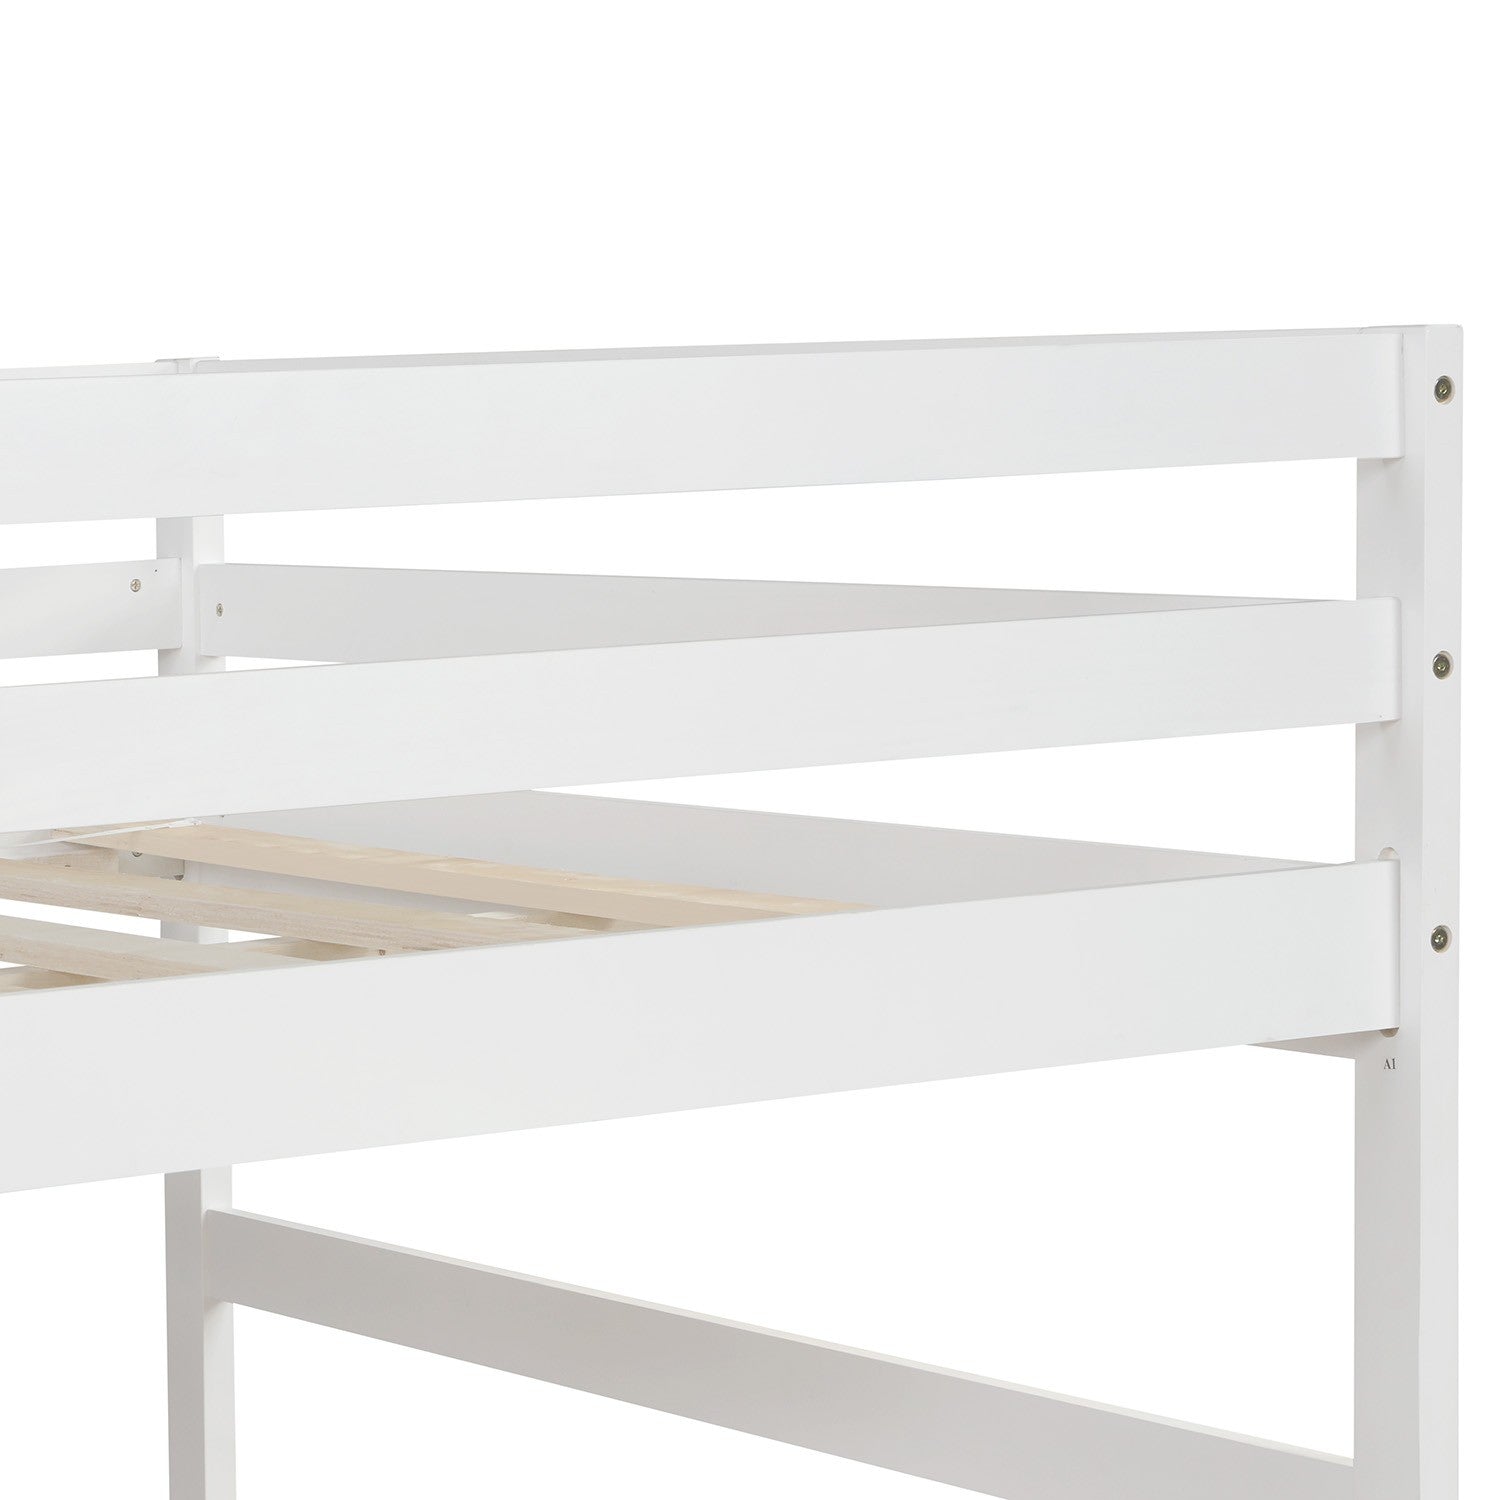 White Full Over Full Contemporary Bunk Bed With Stairs